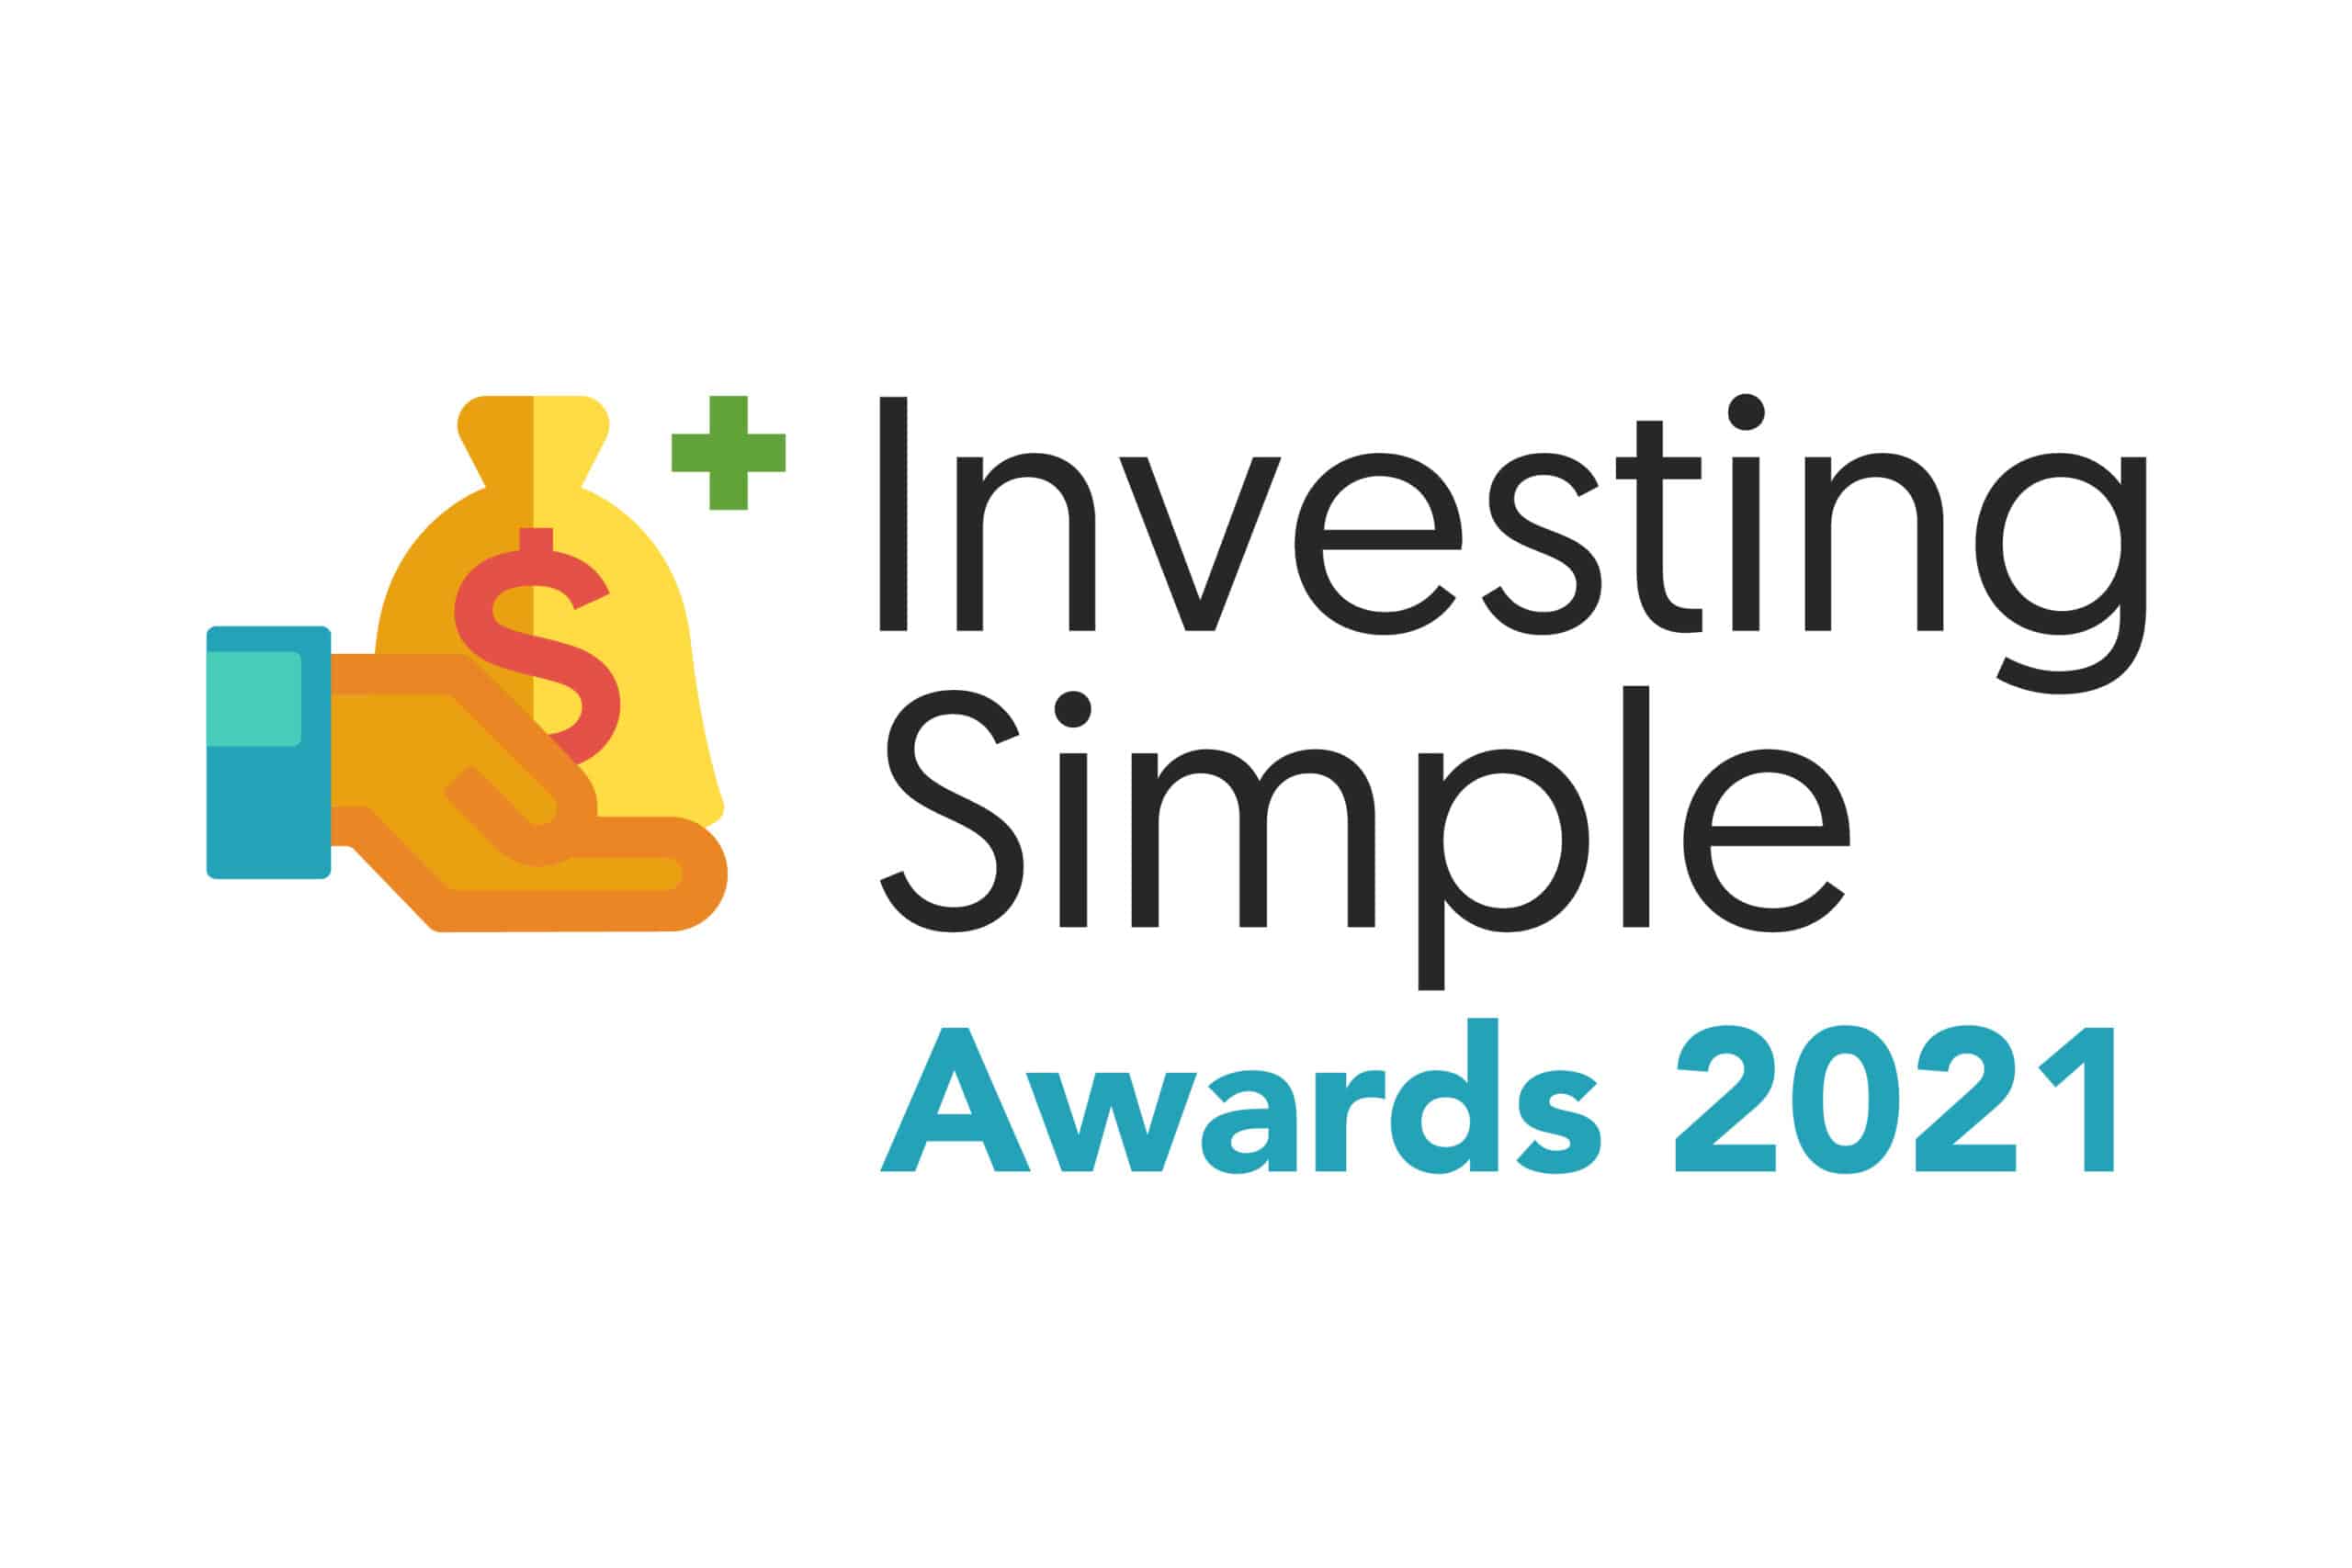 2021 investing simple awards